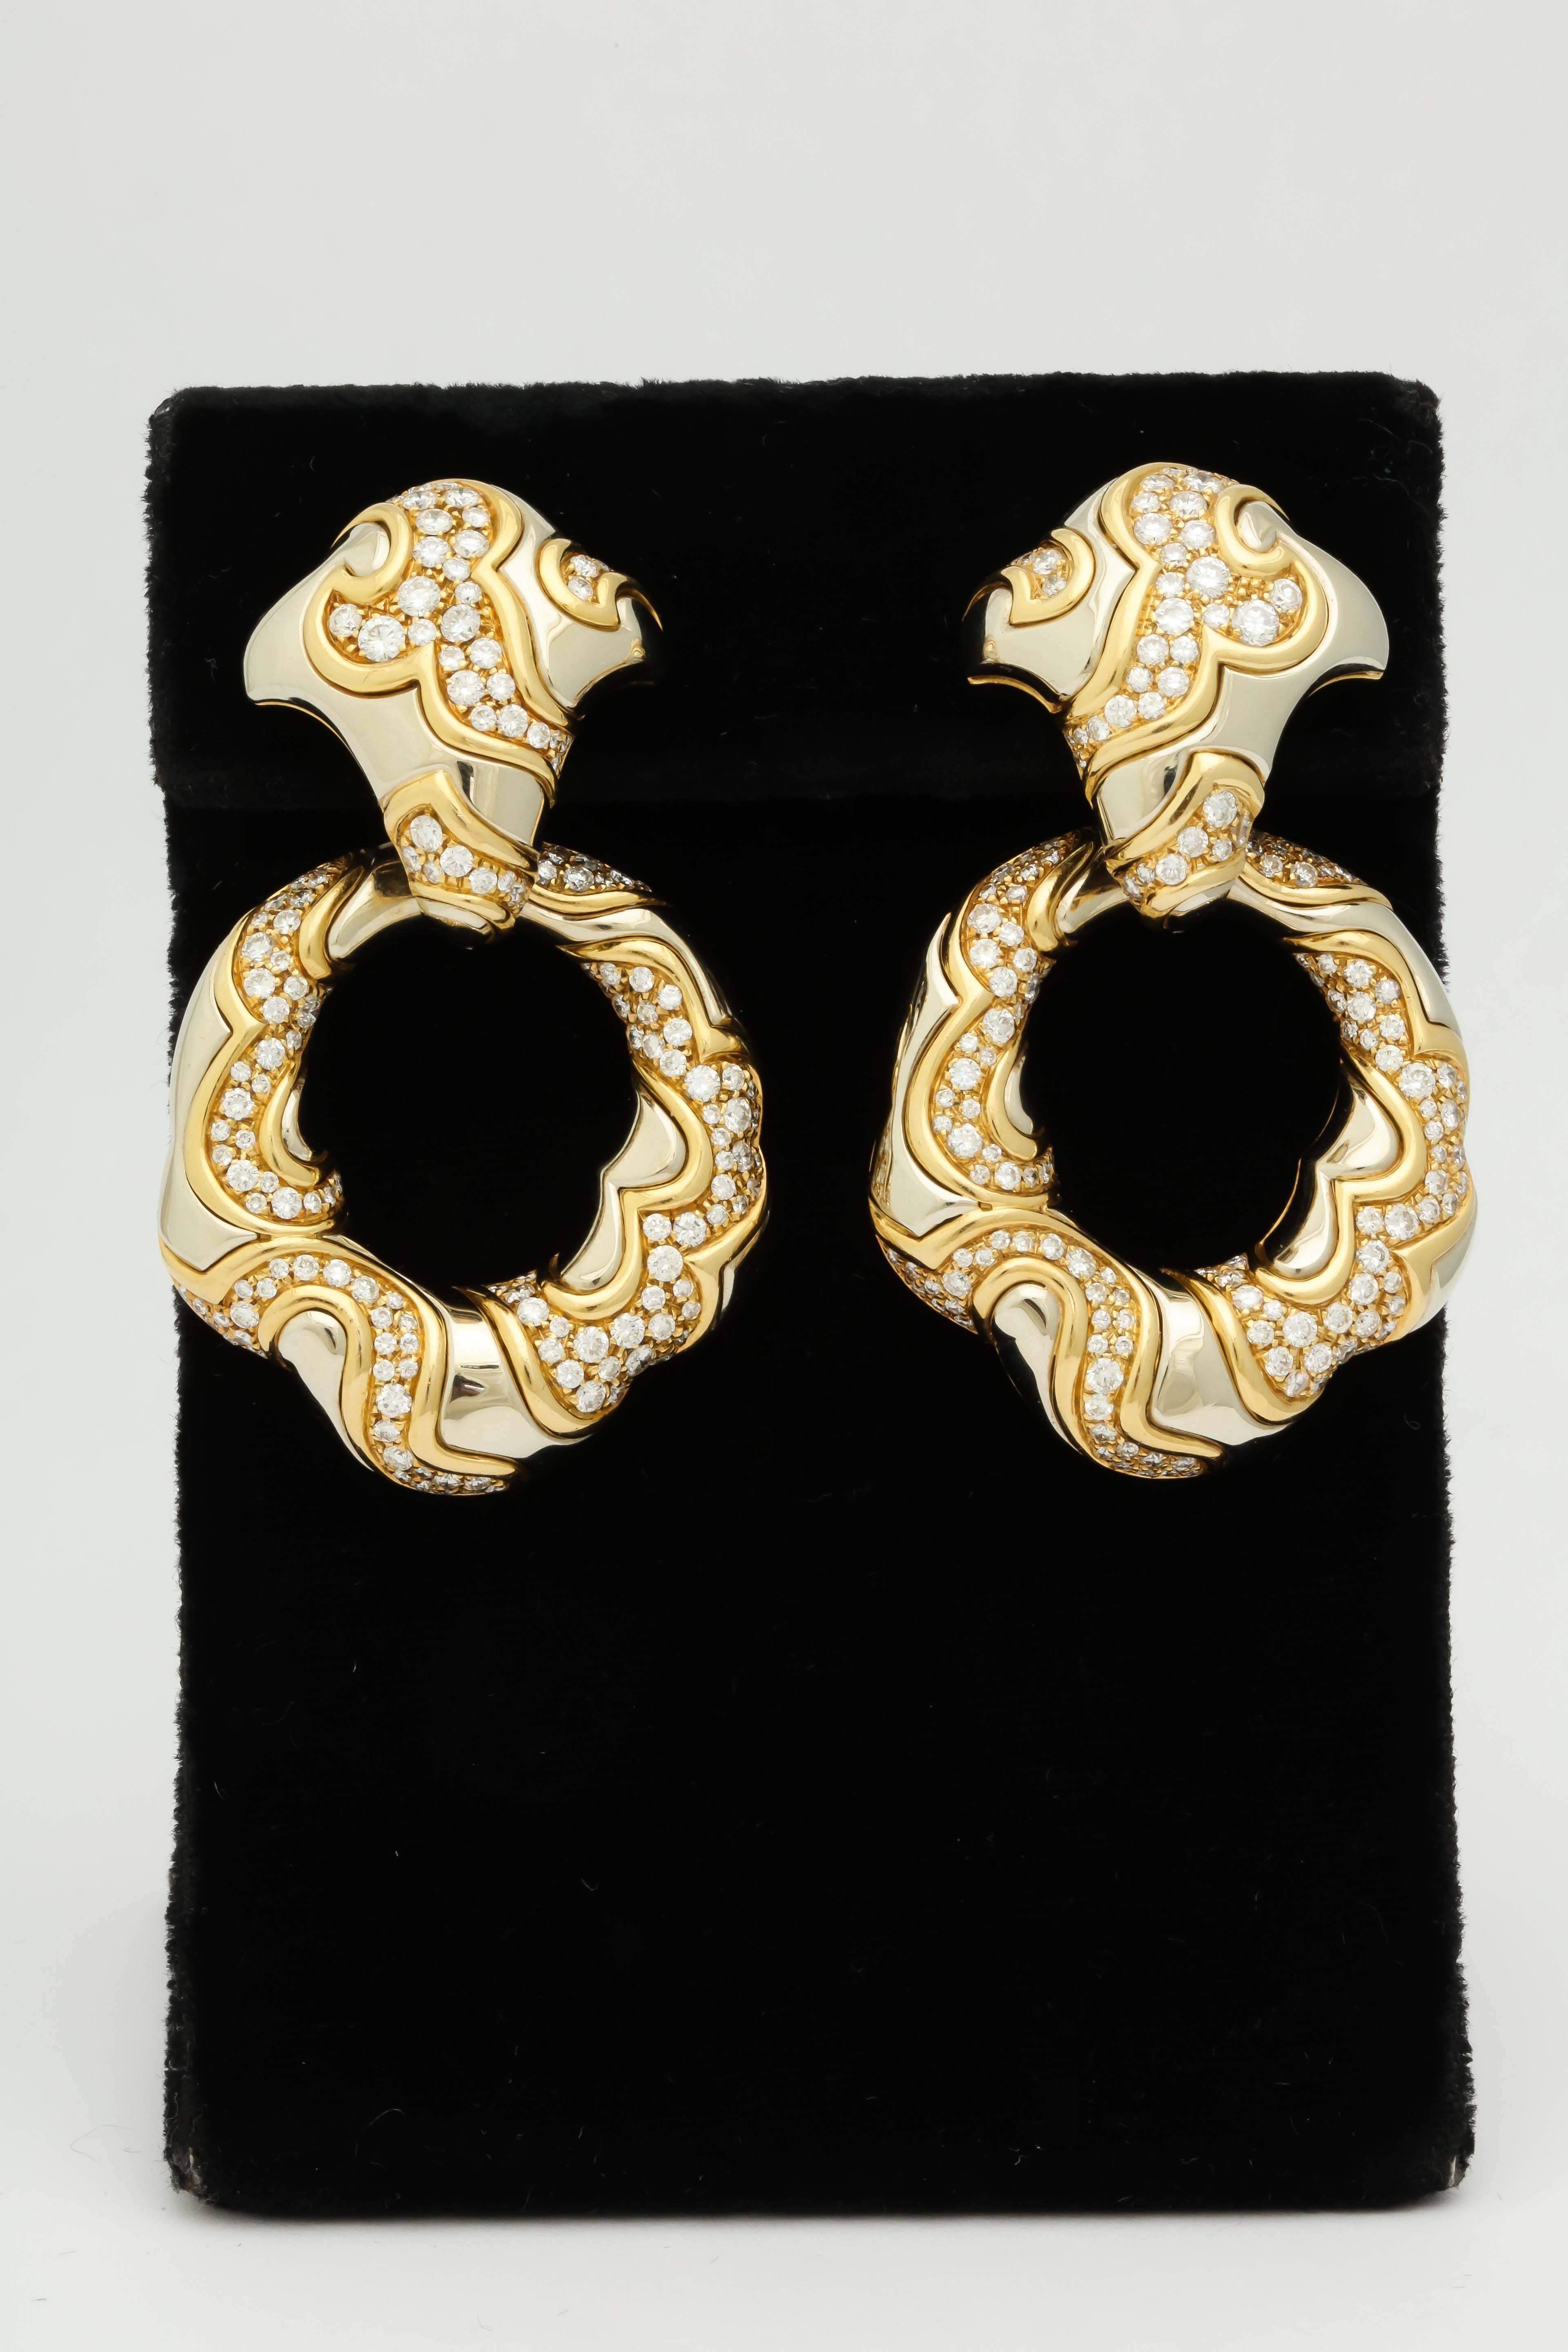 18kt Yellow & White Gold Day And Night Convertible/Detachable Important DoorKnocker Earrings Embellished with Approx. 10Cts of Superior Quality Full Cut Diamonds And Designed With An Abstract Puzzle Design Gold Workmanship. NOTE: Bottom Loops Of